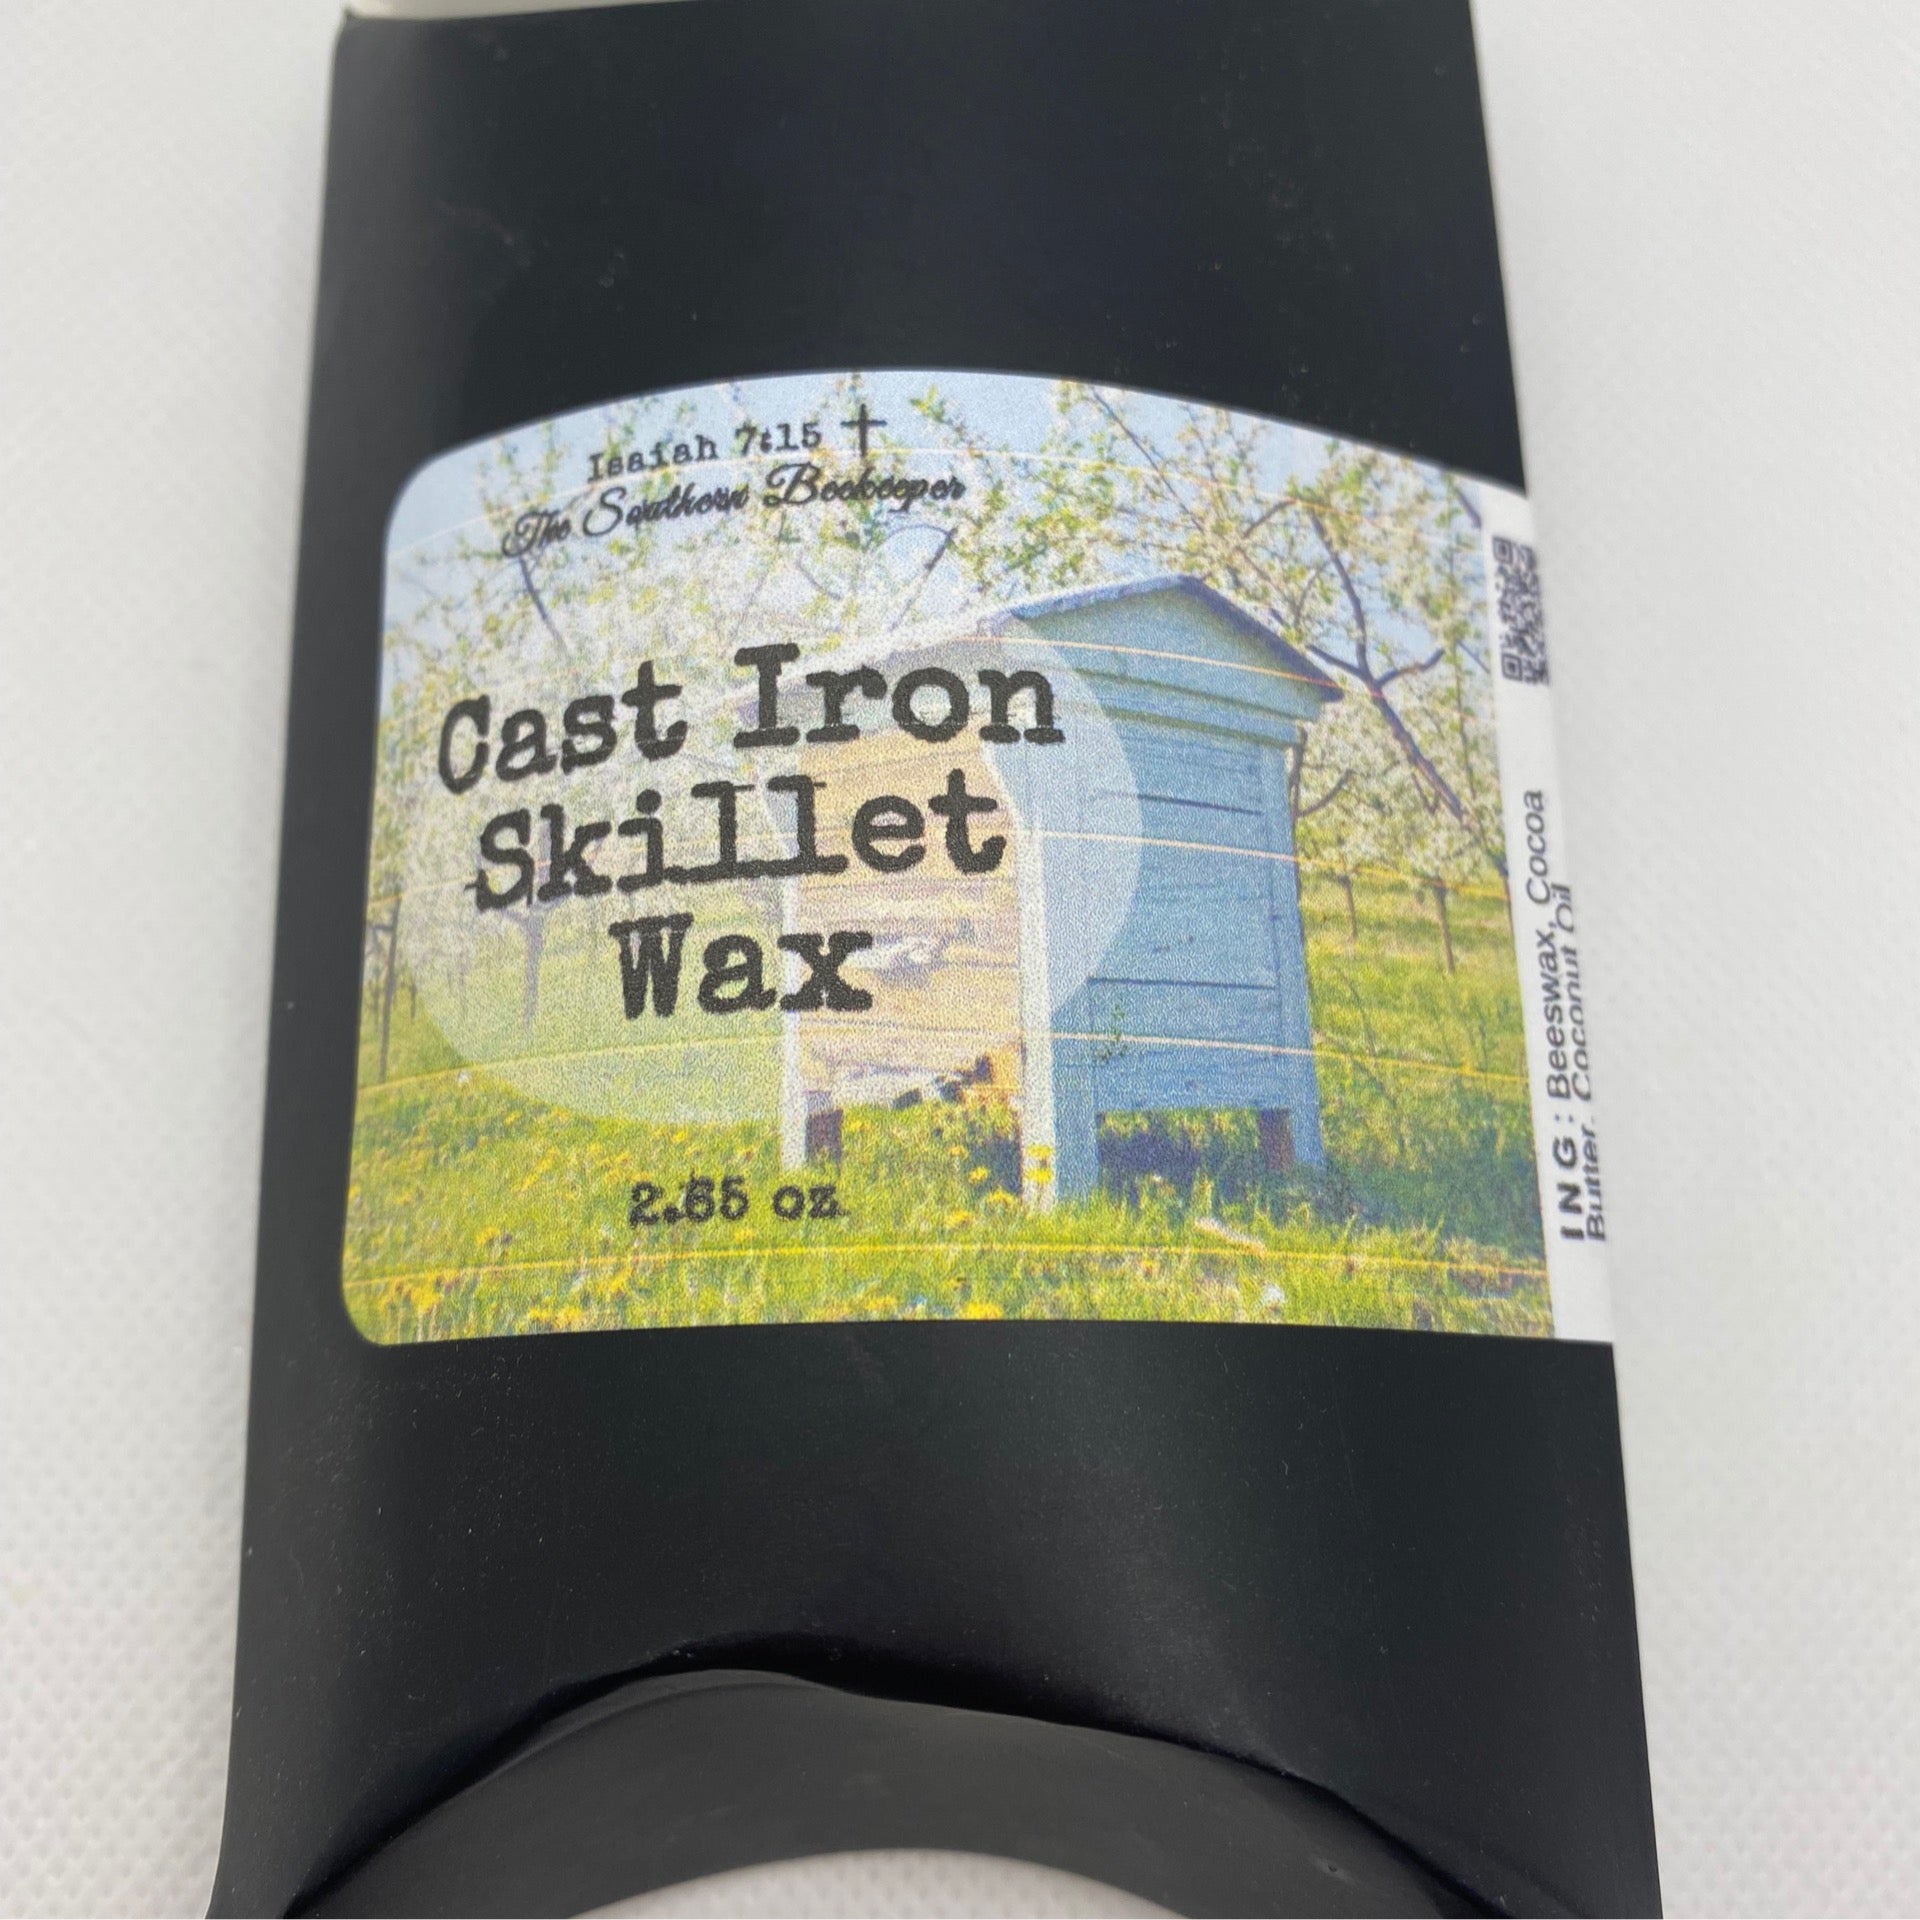 Knapp Made Cast Iron Seasoning Wax and Carbon Steel Seasoning Wax - 2 Oz  Unique Blend of Natural Oils and Beeswax - Restore Cast Iron, Steel,  Cutting